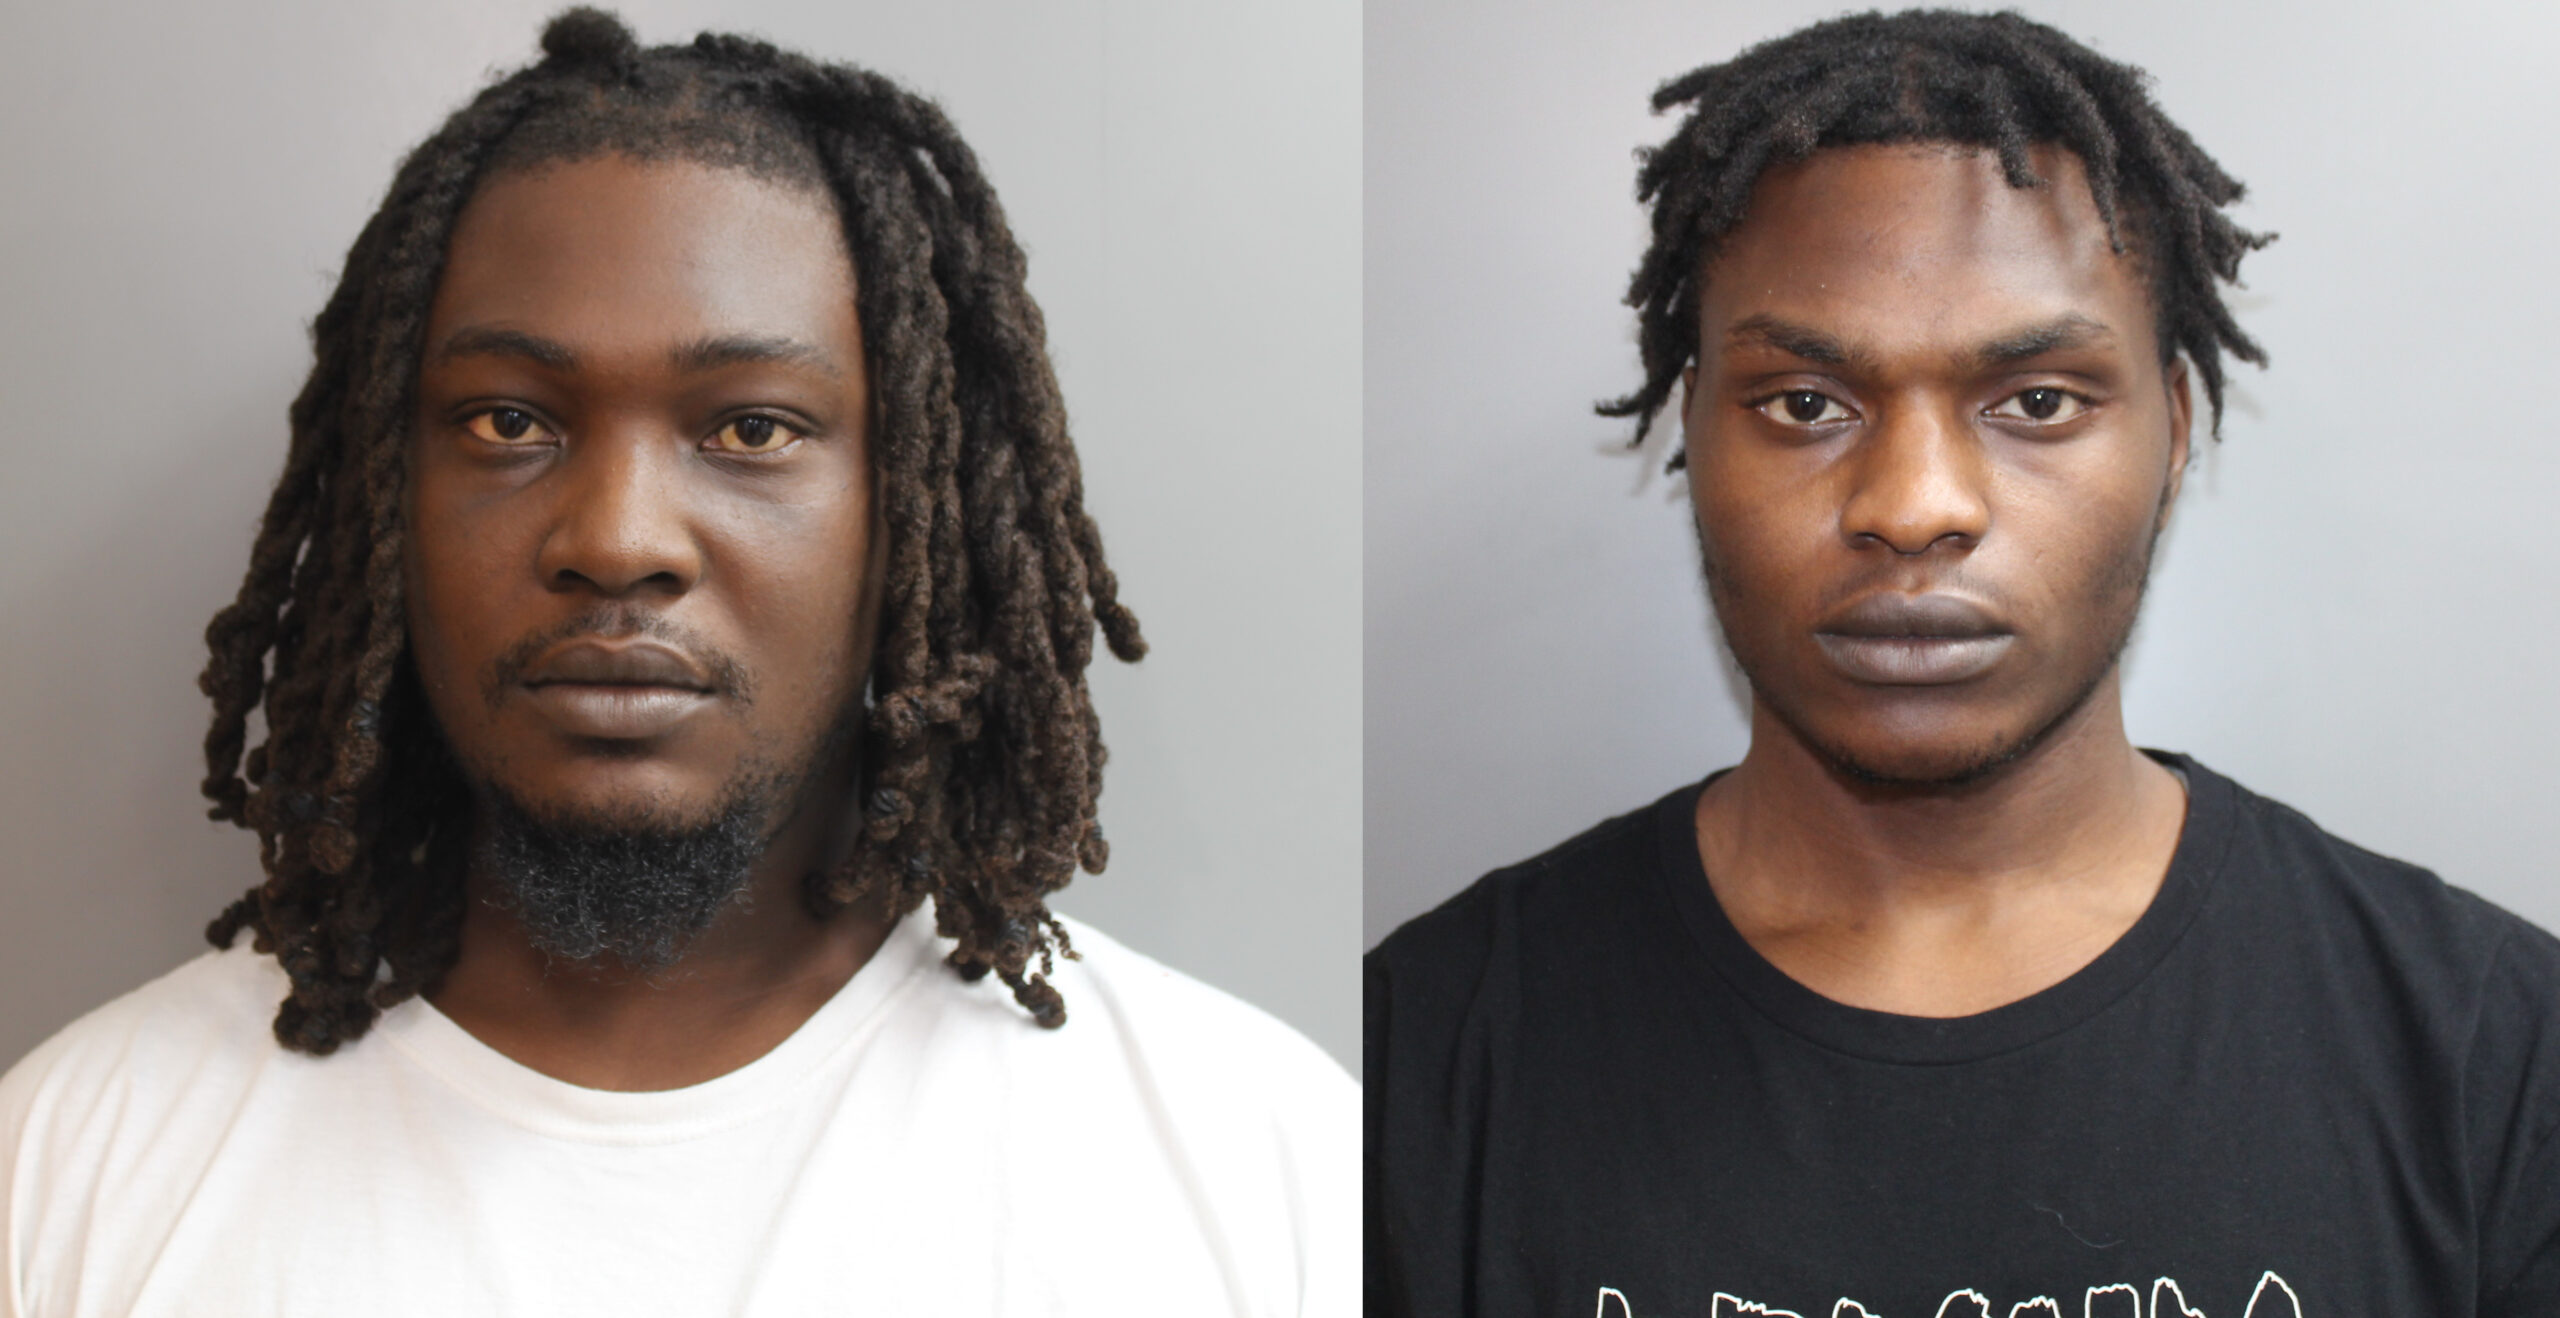 2 Men Arrested For Depositing Forged Checks From VIDOL Totaling $11,769.83